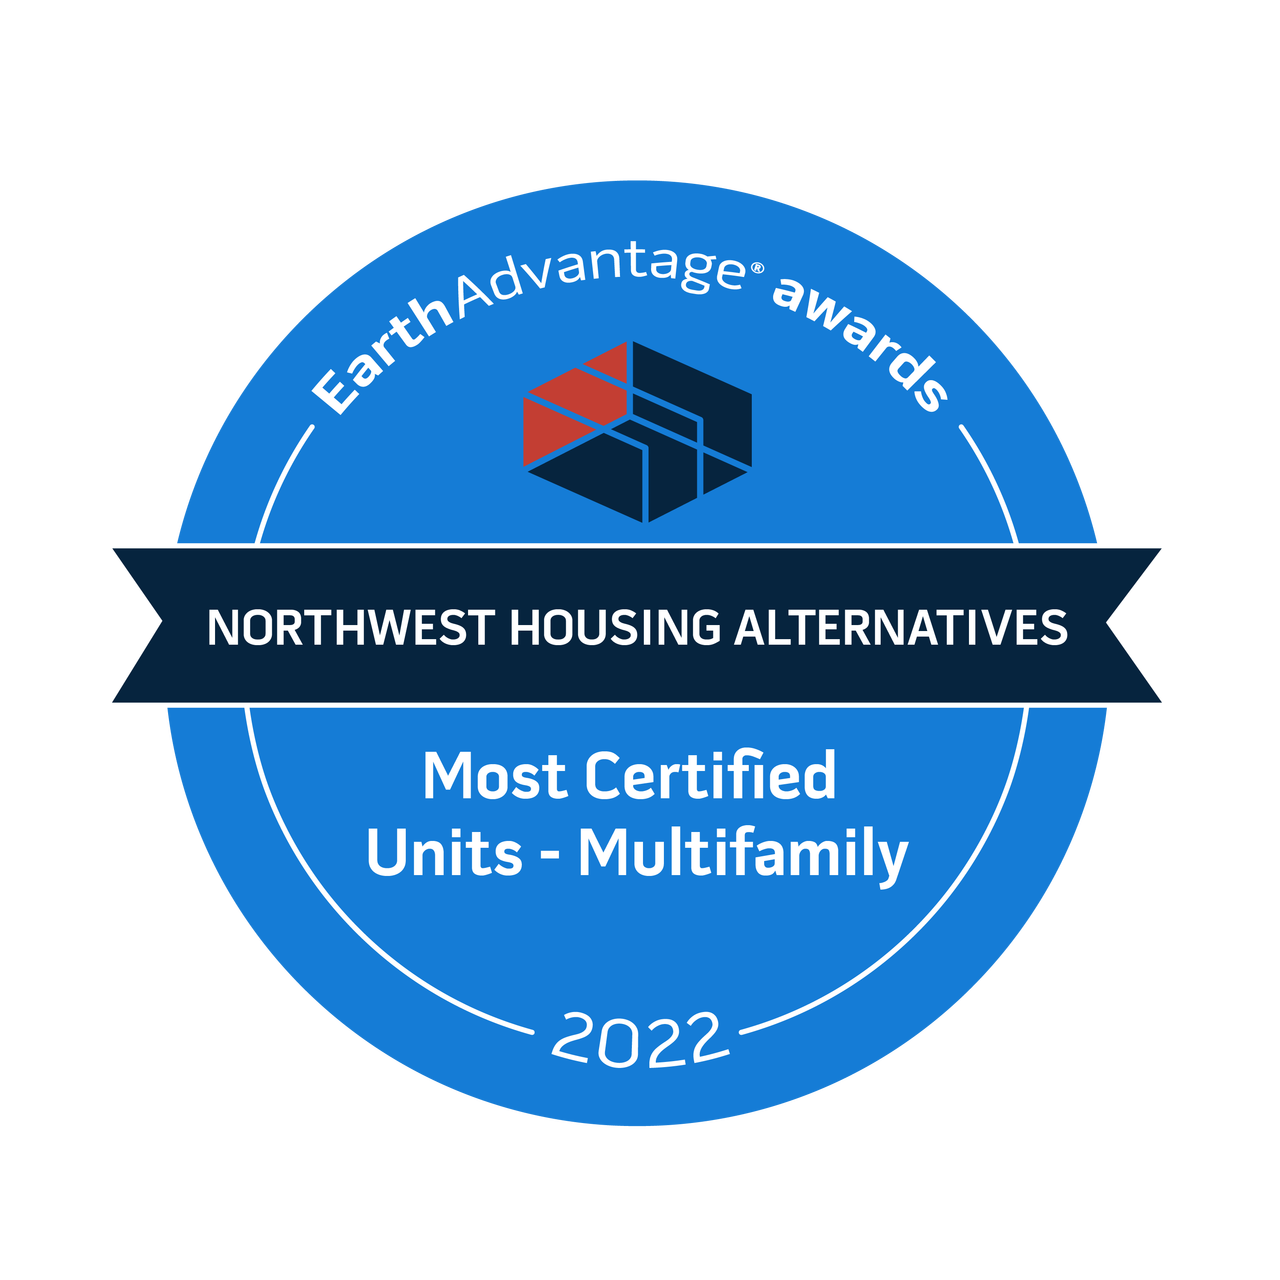 Most Certified Units - Multifamily